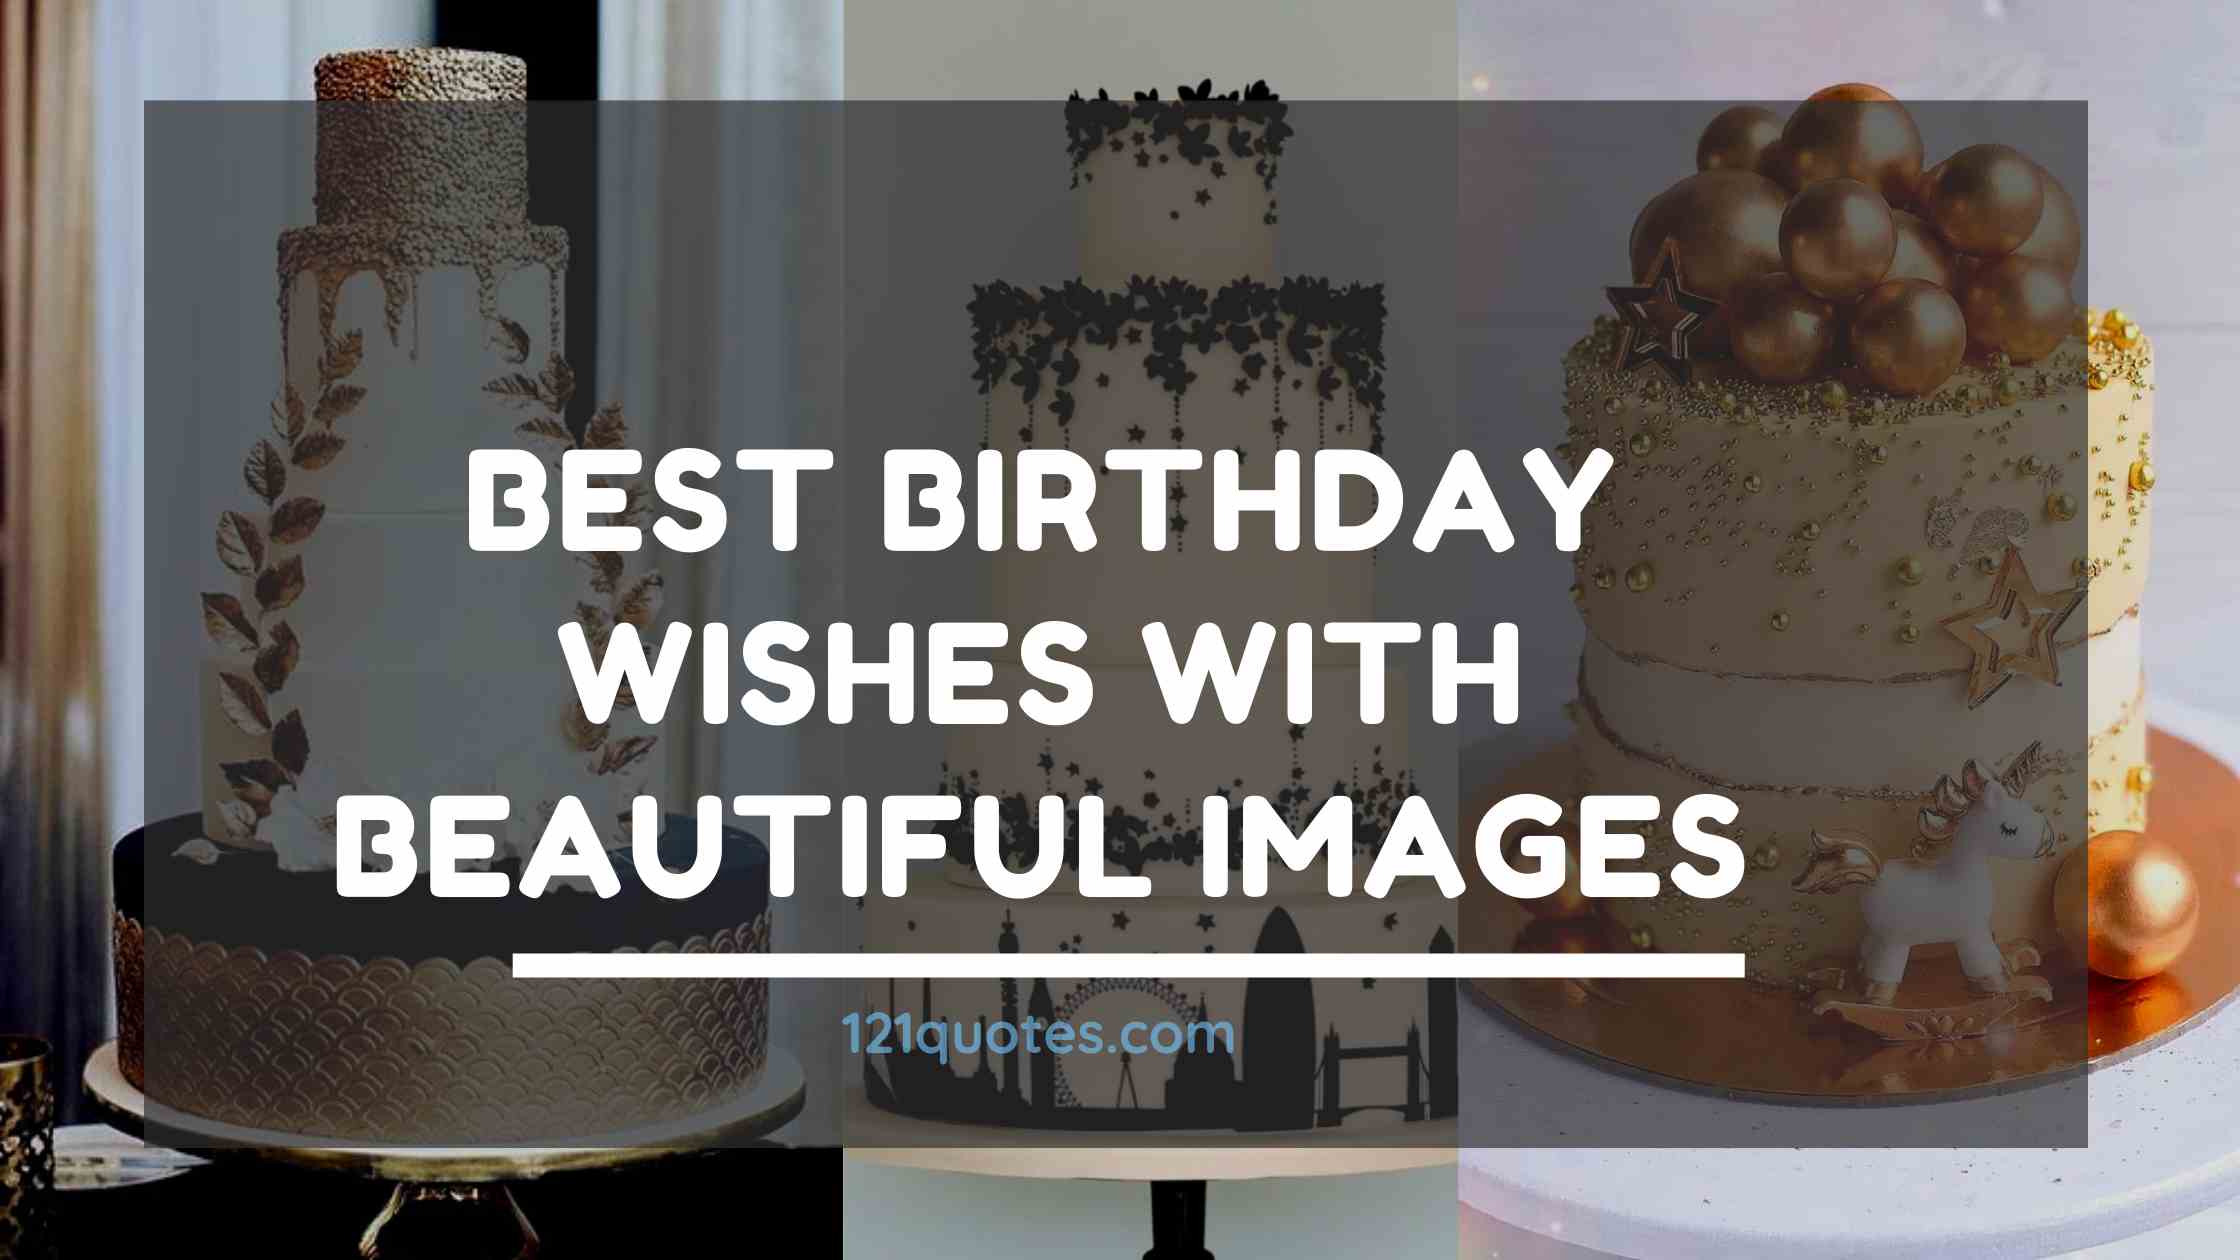 Best Birthday Wishes with Beautiful Images